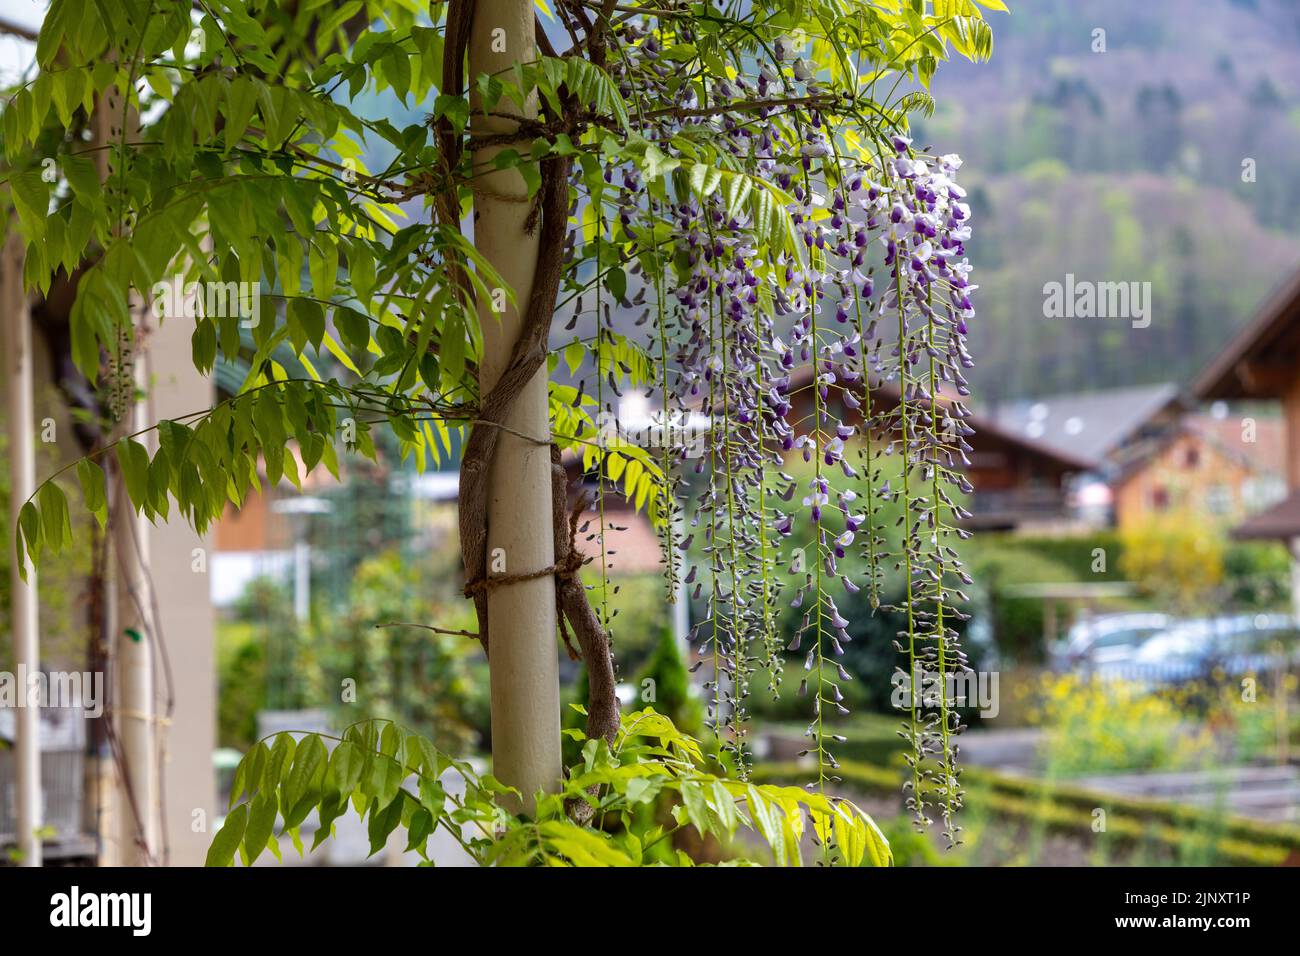 Wisteria vine growing up a metal pole, lilac flowers starting to bloom duringspring springtime Stock Photo